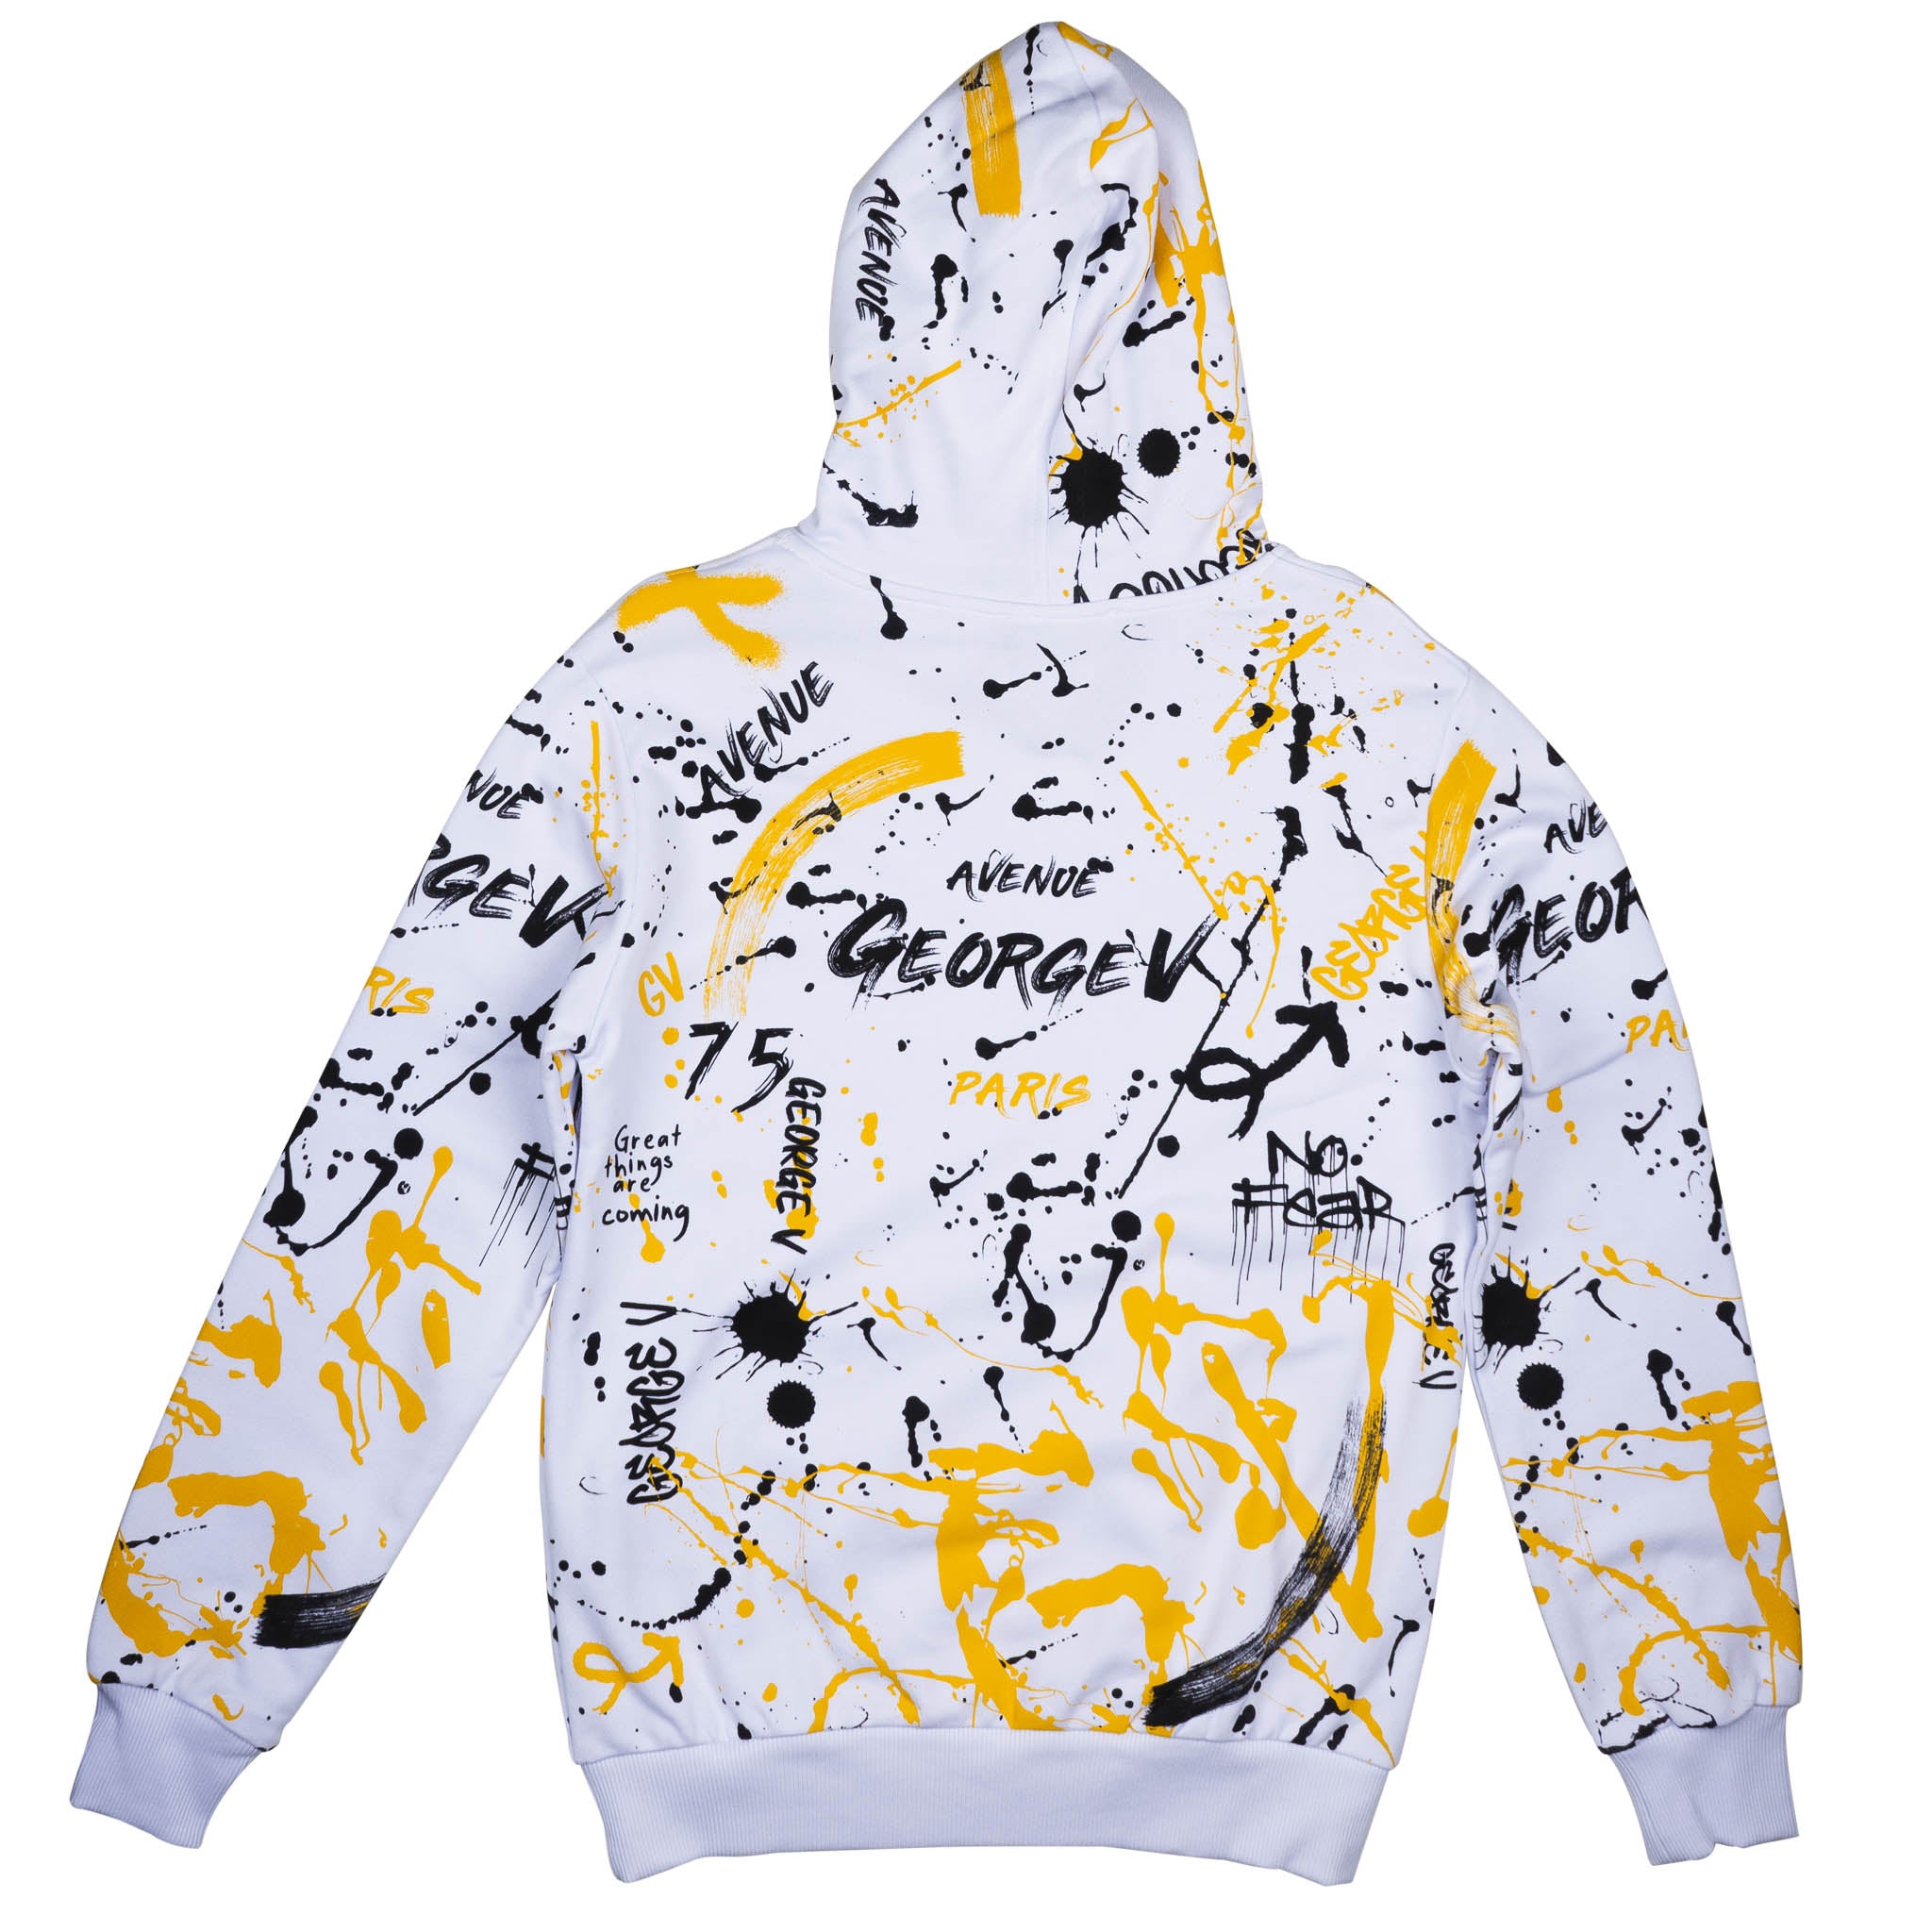 GEORGE V PAINT SPLATTERED BEDAZZLED HOODIE WHITE/GOLD - GV-2419